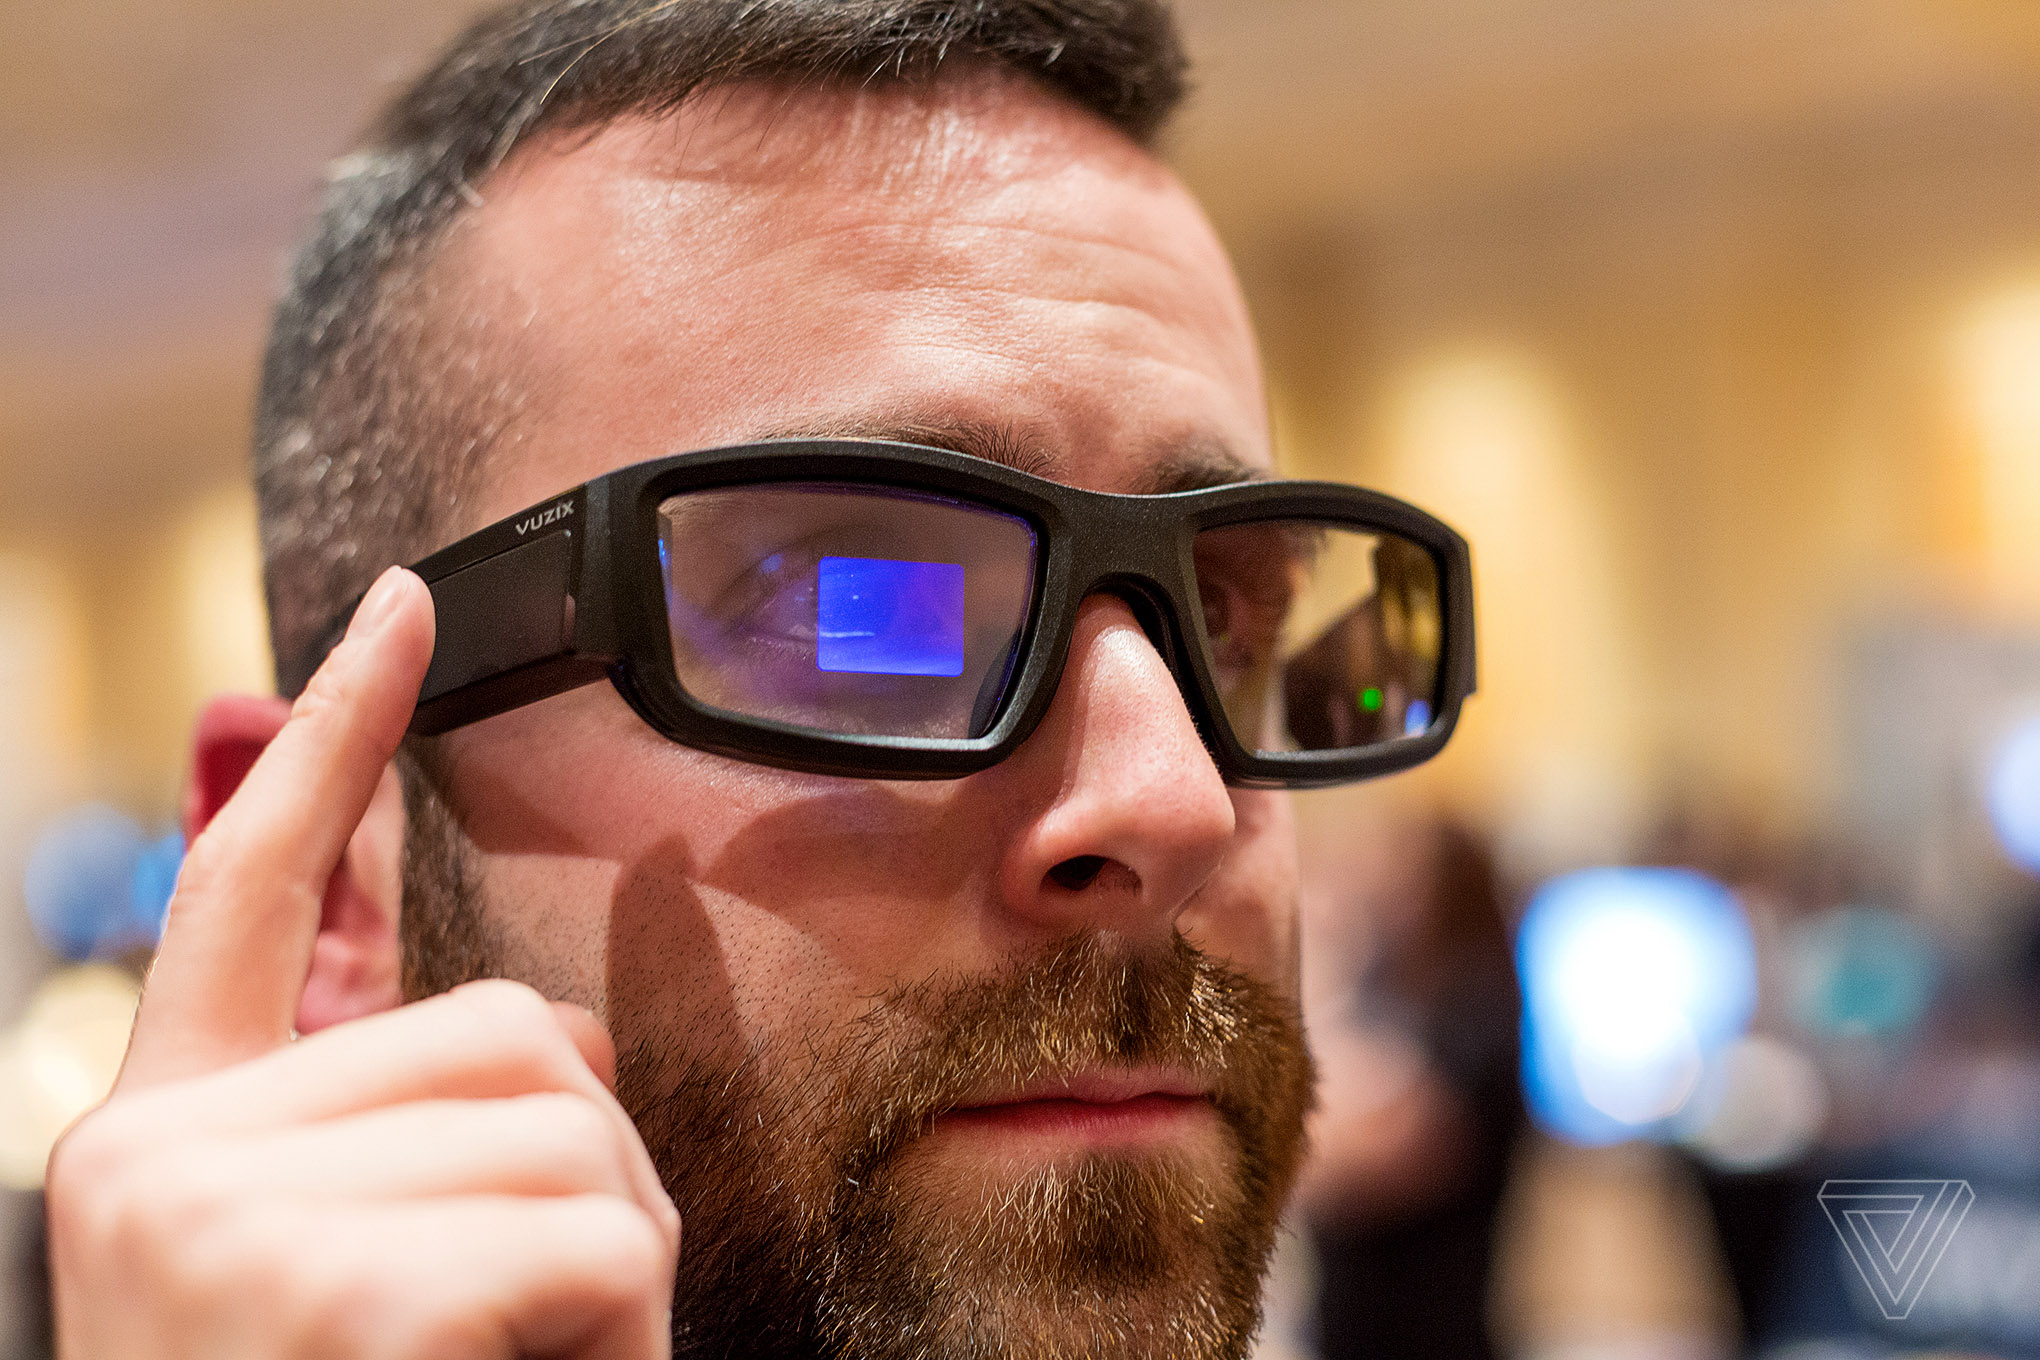 Is Apple Going to Release a Pair of HoloLens Smart Glasses?